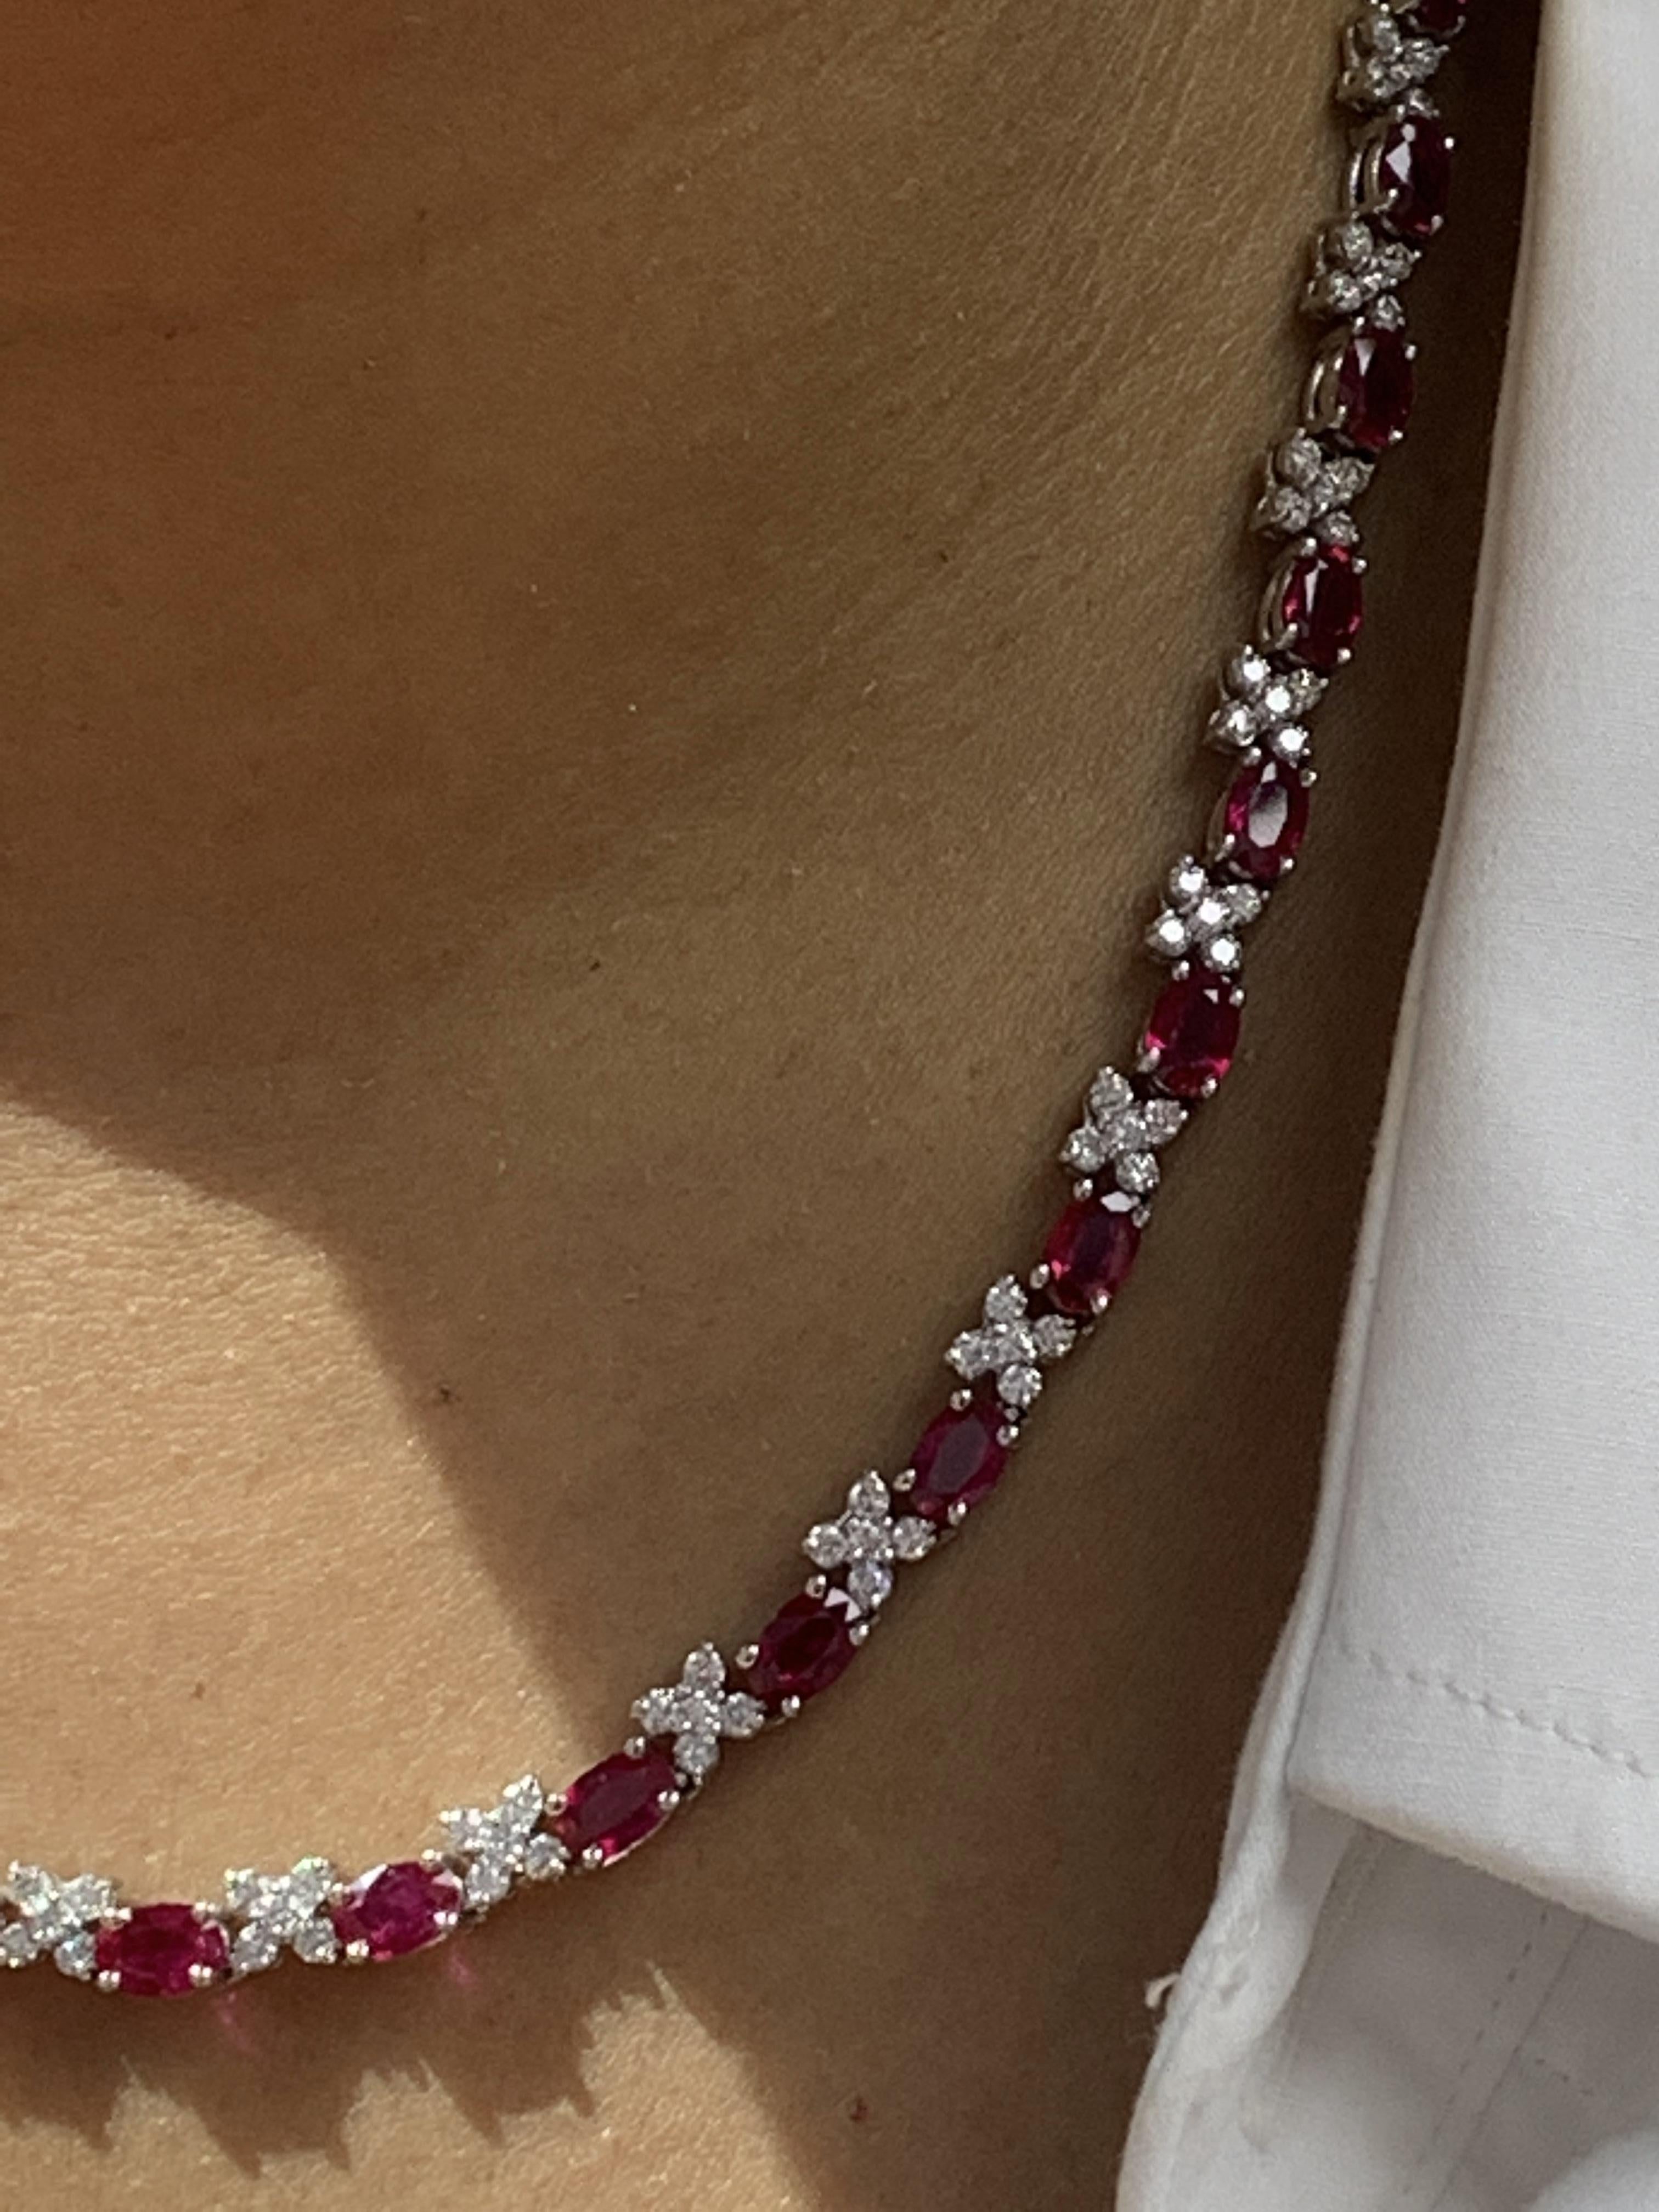 17.68 Carat Oval Cut Ruby and Diamond Tennis Necklace in 14K White Gold 8